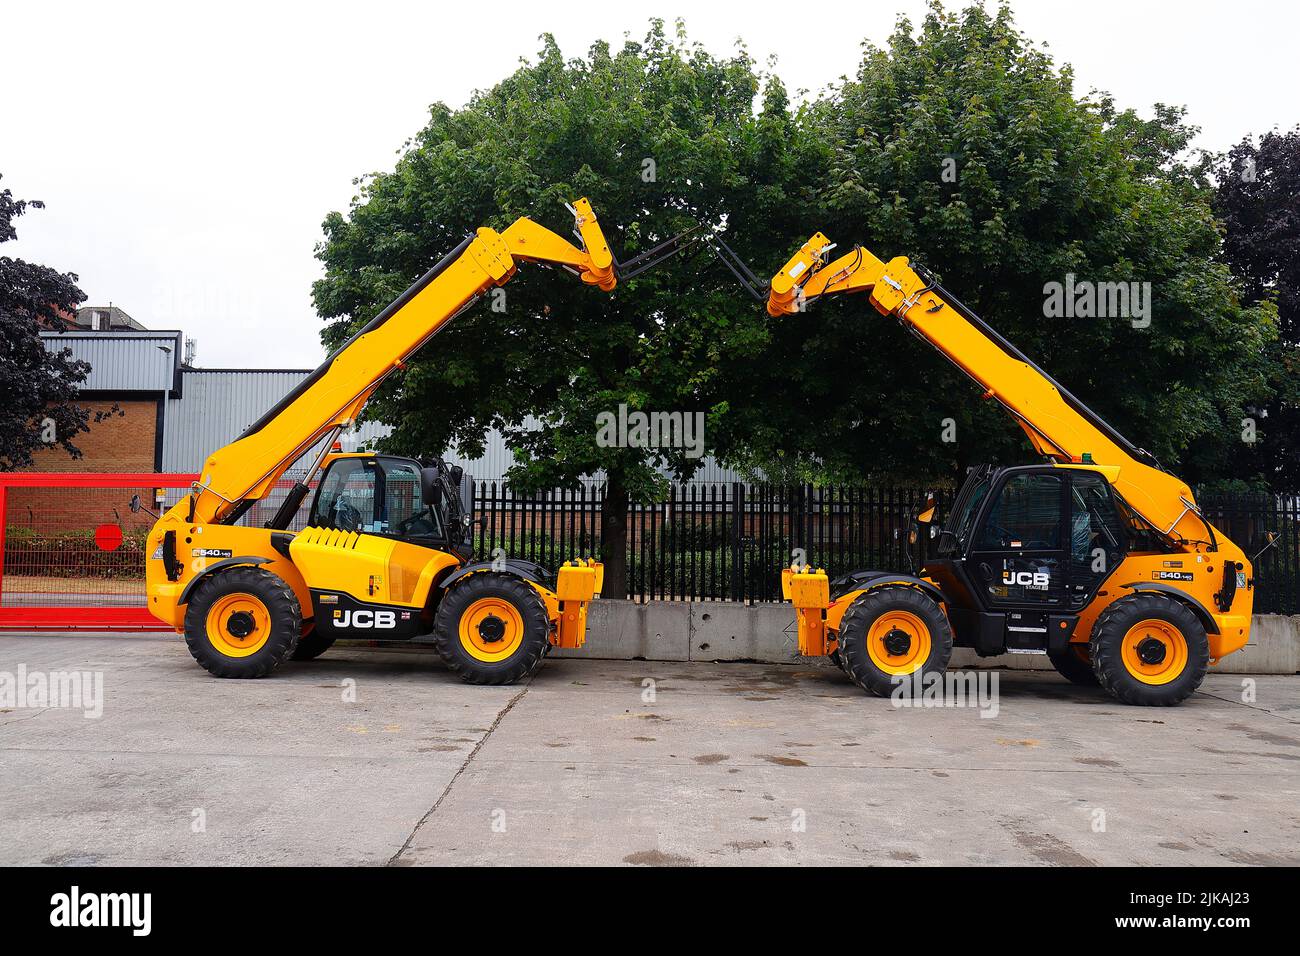 Brand new JCB 540-140 Telescopic Handlers ready for hire at a plant hire depot in Leeds,West Yorkshire,UK Stock Photo